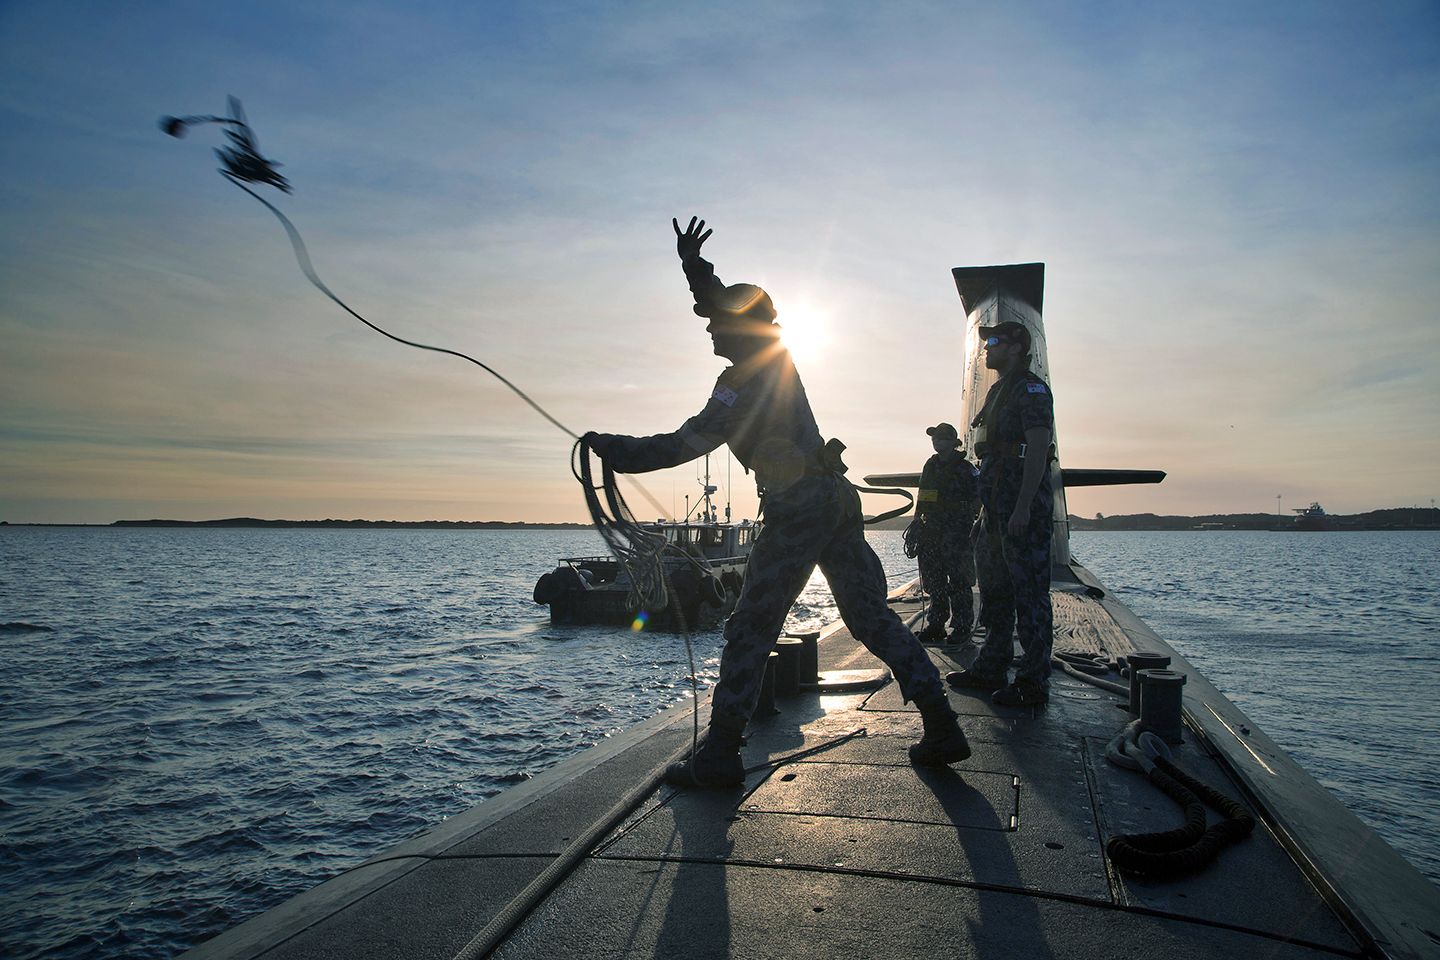 Members of the Navy standing on top of a submarine throwing a rope.